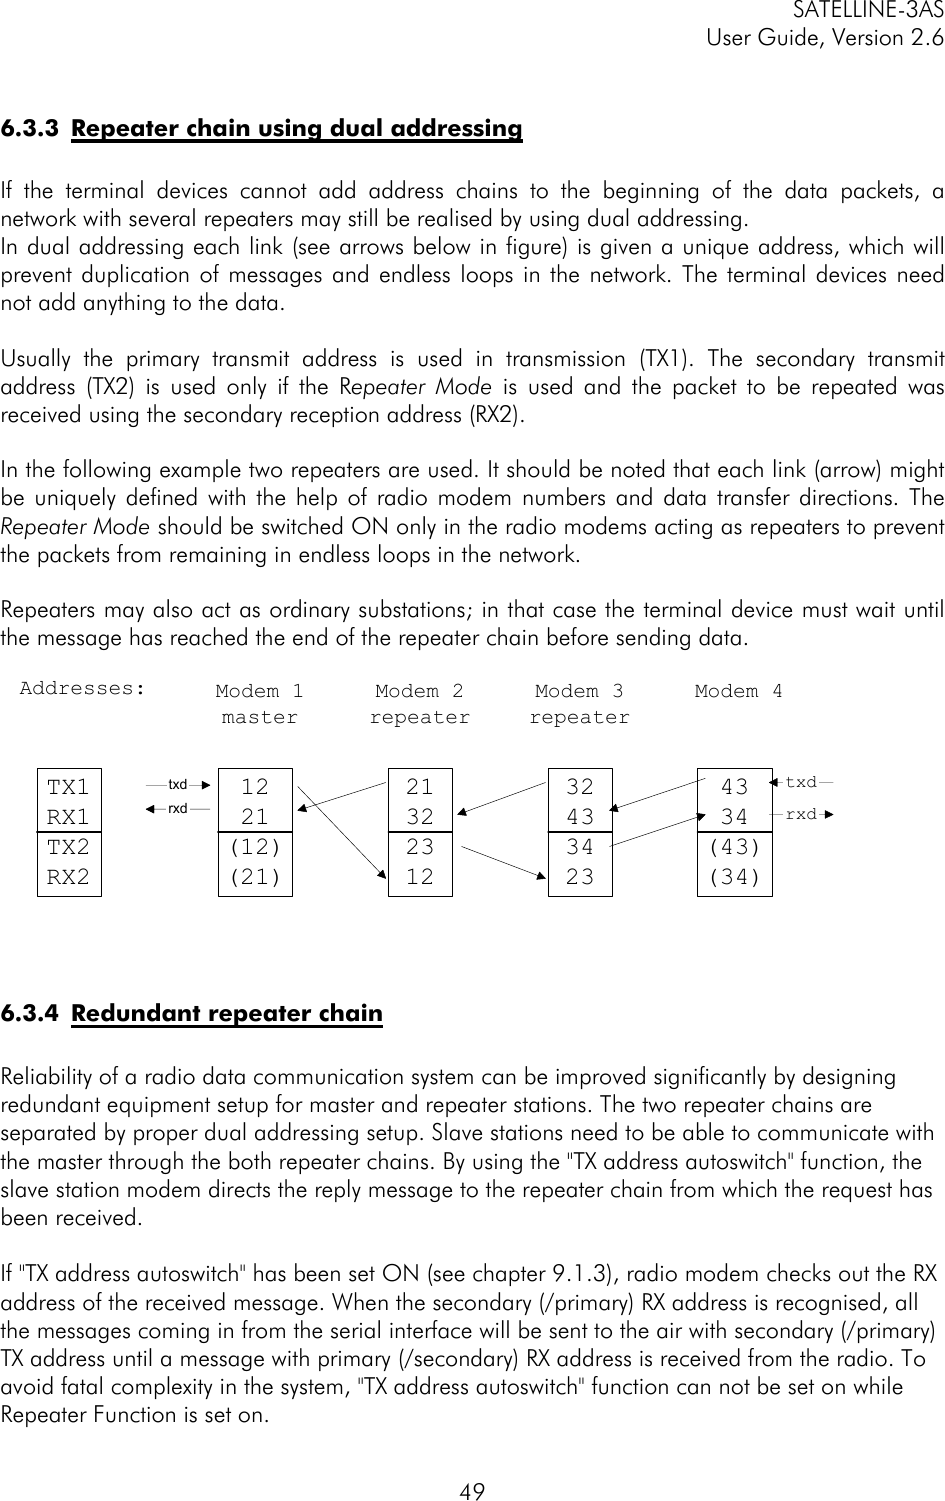 SATELLINE-3AS User Guide, Version 2.6   49 6.3.3 Repeater chain using dual addressing  If the terminal devices cannot add address chains to the beginning of the data packets, a network with several repeaters may still be realised by using dual addressing. In dual addressing each link (see arrows below in figure) is given a unique address, which will prevent duplication of messages and endless loops in the network. The terminal devices need not add anything to the data.  Usually the primary transmit address is used in transmission (TX1). The secondary transmit address (TX2) is used only if the Repeater Mode is used and the packet to be repeated was received using the secondary reception address (RX2).  In the following example two repeaters are used. It should be noted that each link (arrow) might be uniquely defined with the help of radio modem numbers and data transfer directions. The Repeater Mode should be switched ON only in the radio modems acting as repeaters to prevent the packets from remaining in endless loops in the network.   Repeaters may also act as ordinary substations; in that case the terminal device must wait until the message has reached the end of the repeater chain before sending data.             6.3.4 Redundant repeater chain  Reliability of a radio data communication system can be improved significantly by designing redundant equipment setup for master and repeater stations. The two repeater chains are separated by proper dual addressing setup. Slave stations need to be able to communicate with the master through the both repeater chains. By using the &quot;TX address autoswitch&quot; function, the slave station modem directs the reply message to the repeater chain from which the request has been received.  If &quot;TX address autoswitch&quot; has been set ON (see chapter 9.1.3), radio modem checks out the RX address of the received message. When the secondary (/primary) RX address is recognised, all the messages coming in from the serial interface will be sent to the air with secondary (/primary) TX address until a message with primary (/secondary) RX address is received from the radio. To avoid fatal complexity in the system, &quot;TX address autoswitch&quot; function can not be set on while Repeater Function is set on. 1221(12)(21)21322312324334234334(43)(34)rxdtxdrxdtxdModem 1masterModem 2repeaterModem 3repeaterModem 4TX1RX1TX2RX2Addresses: 